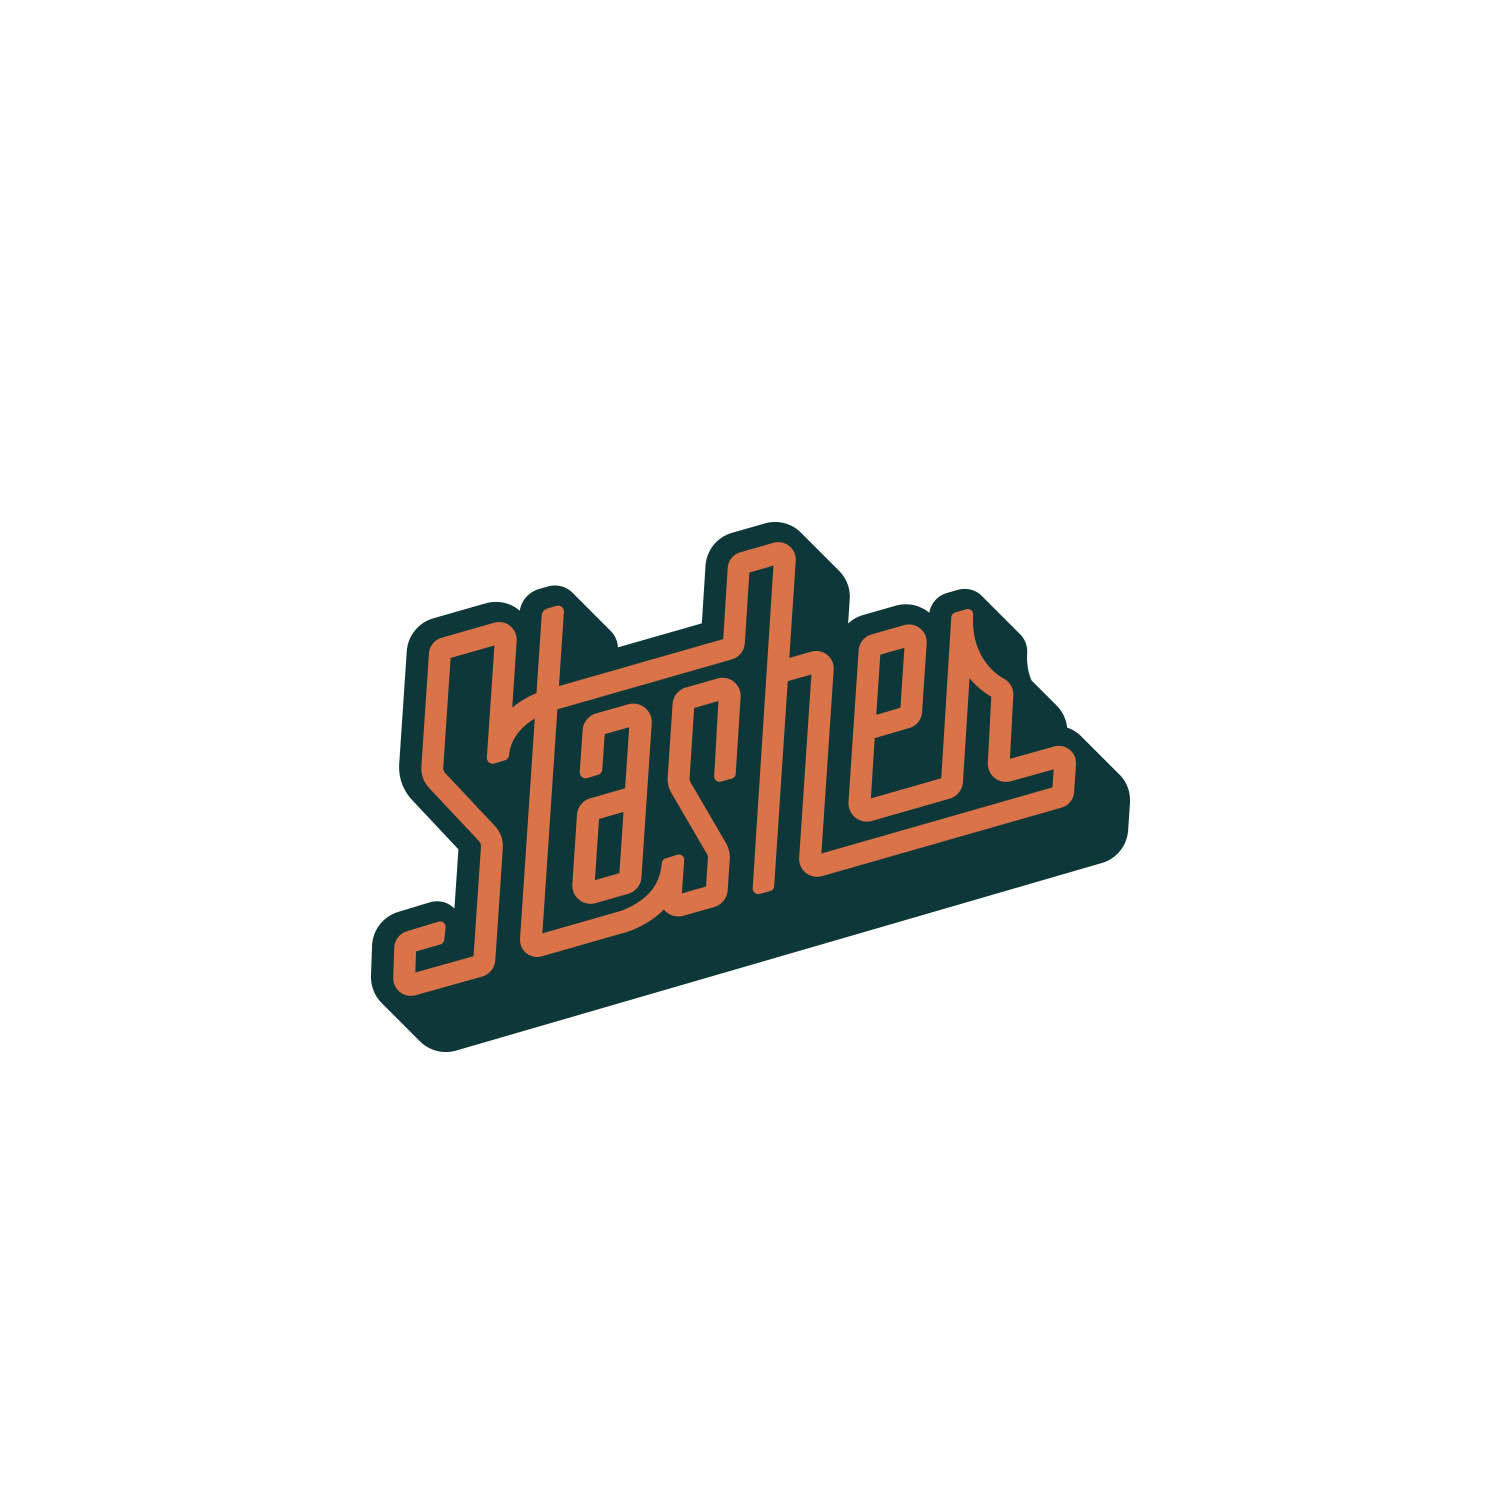 Stasher logo design by logo designer Chelsea Ryan for your inspiration and for the worlds largest logo competition